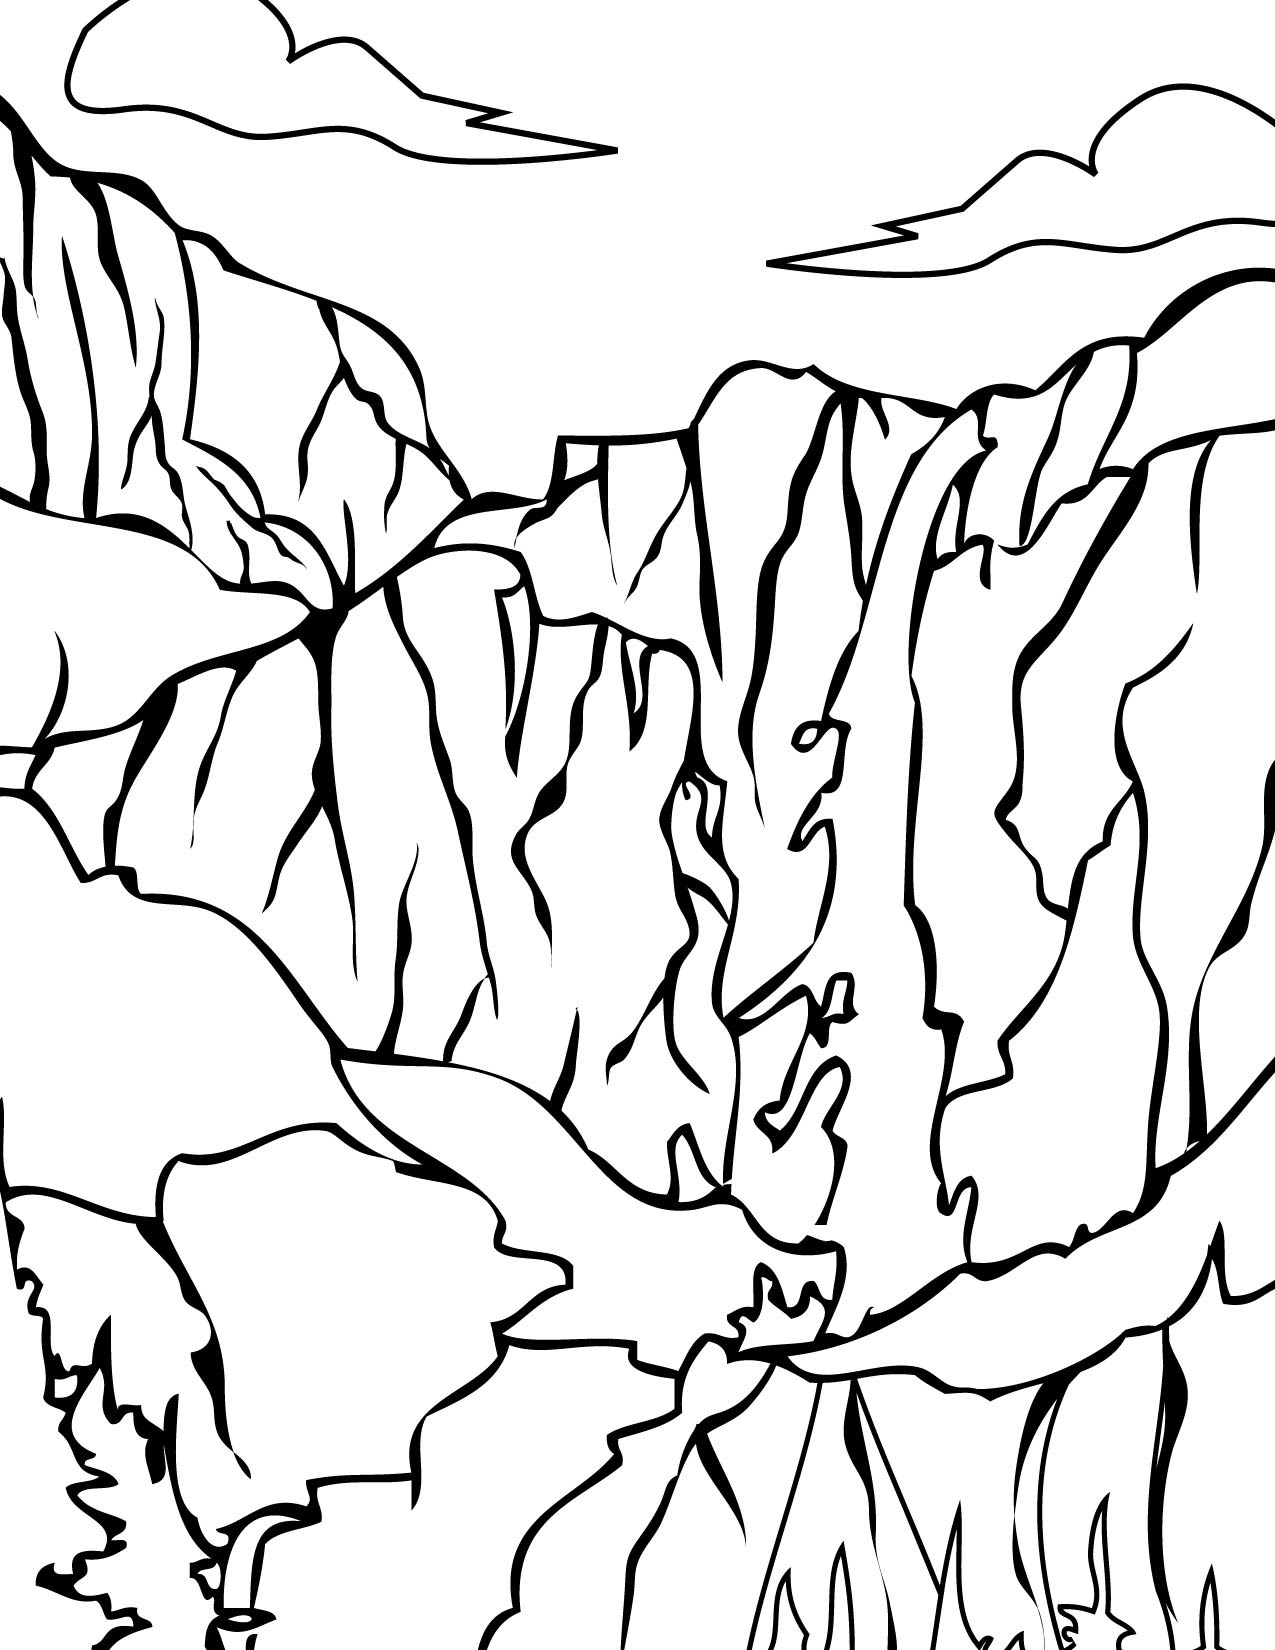 18 Yosemite Coloring Pages - Printable Coloring Pages